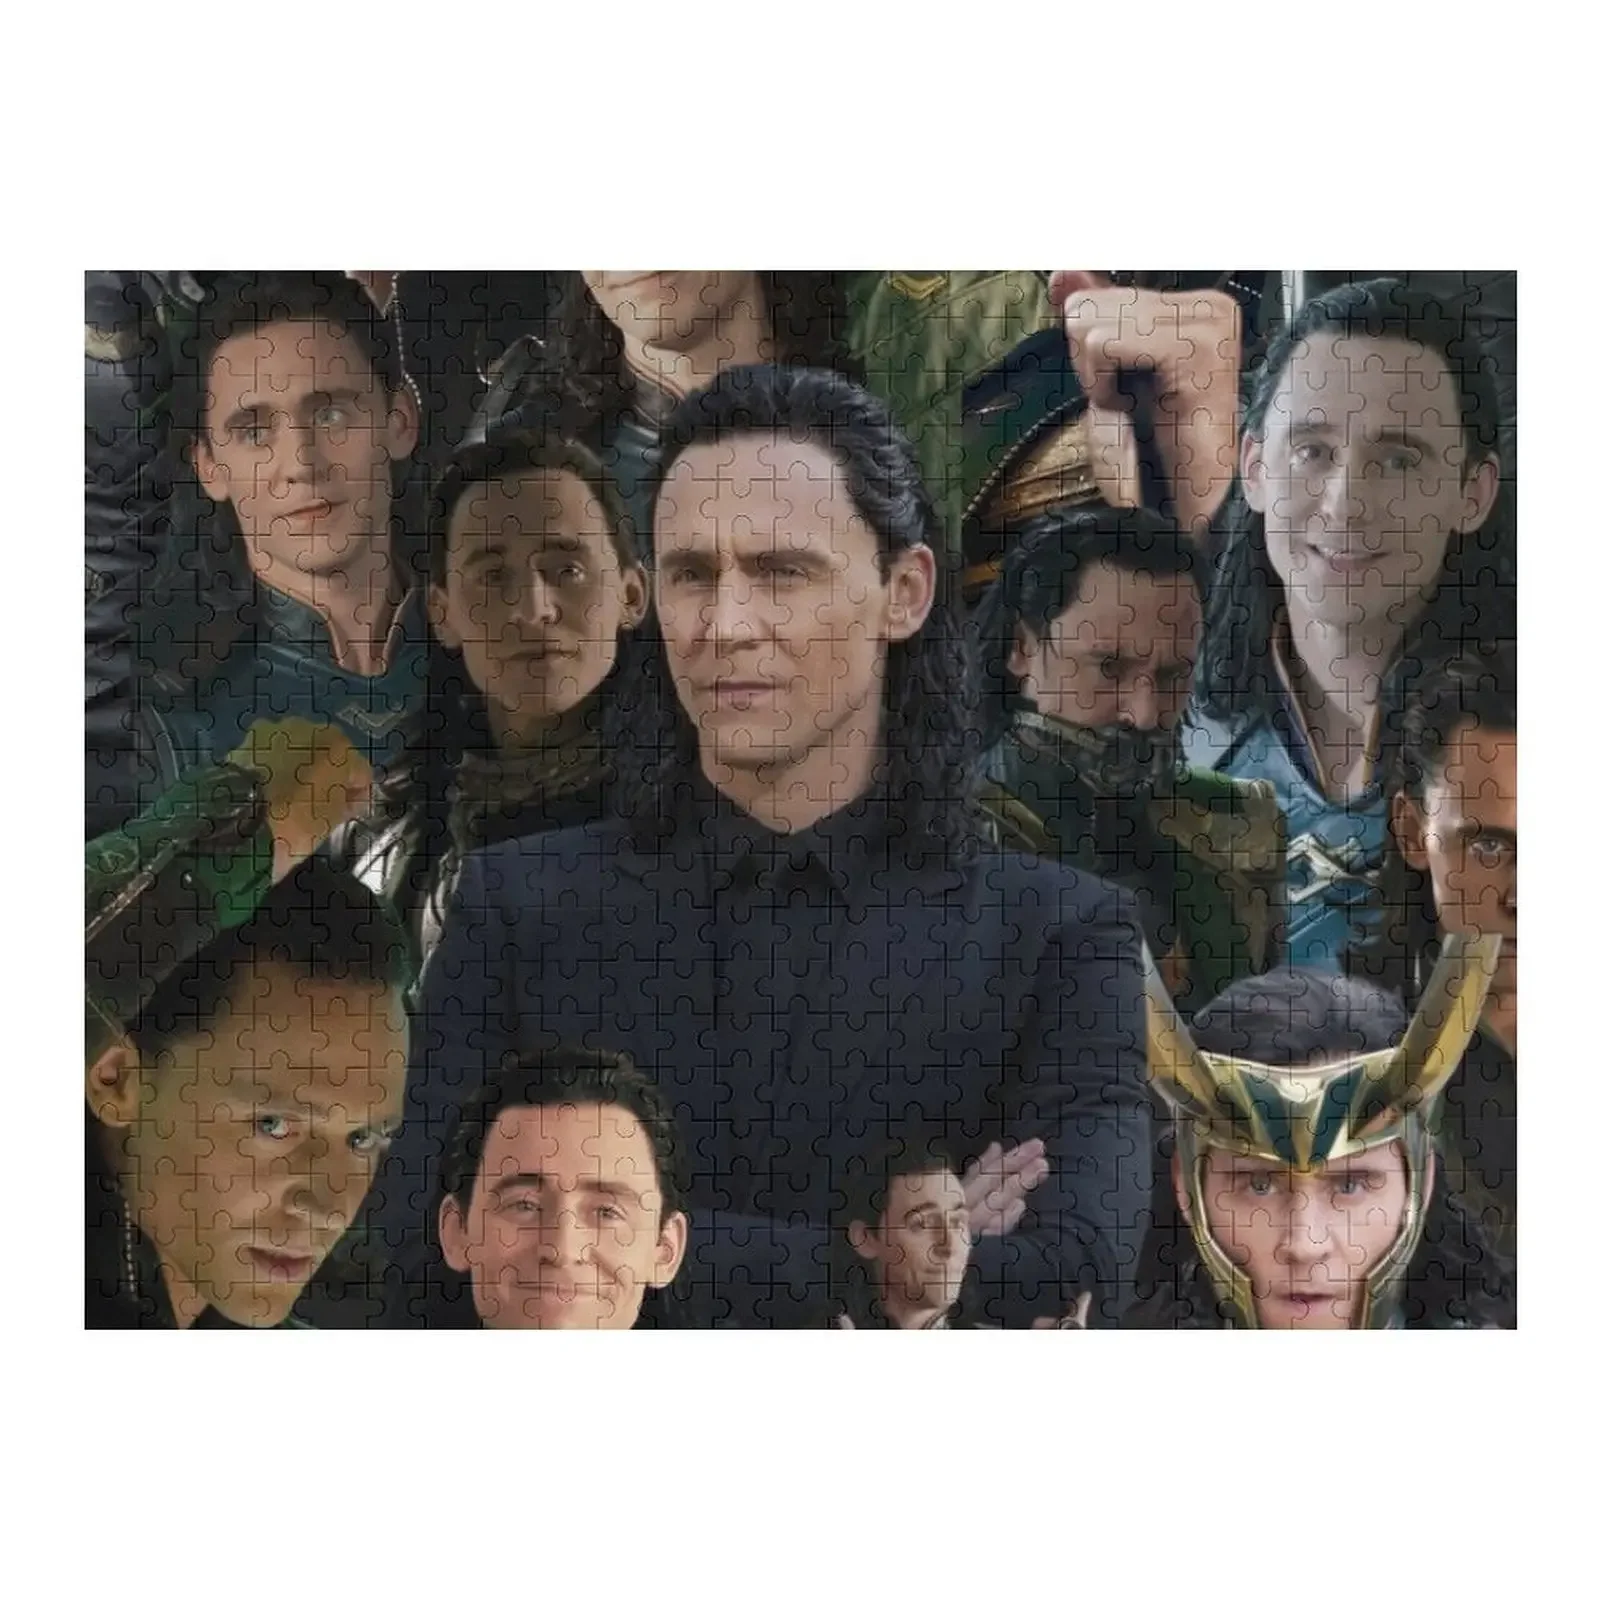 Tom Hiddleston collage Jigsaw Puzzle Baby Toy Personalized Child Gift Jigsaw Custom Customizeds For Kids Puzzle dylan obrien abstract rectangular collage pattern jigsaw puzzle personalized custom child photo personalized gifts puzzle